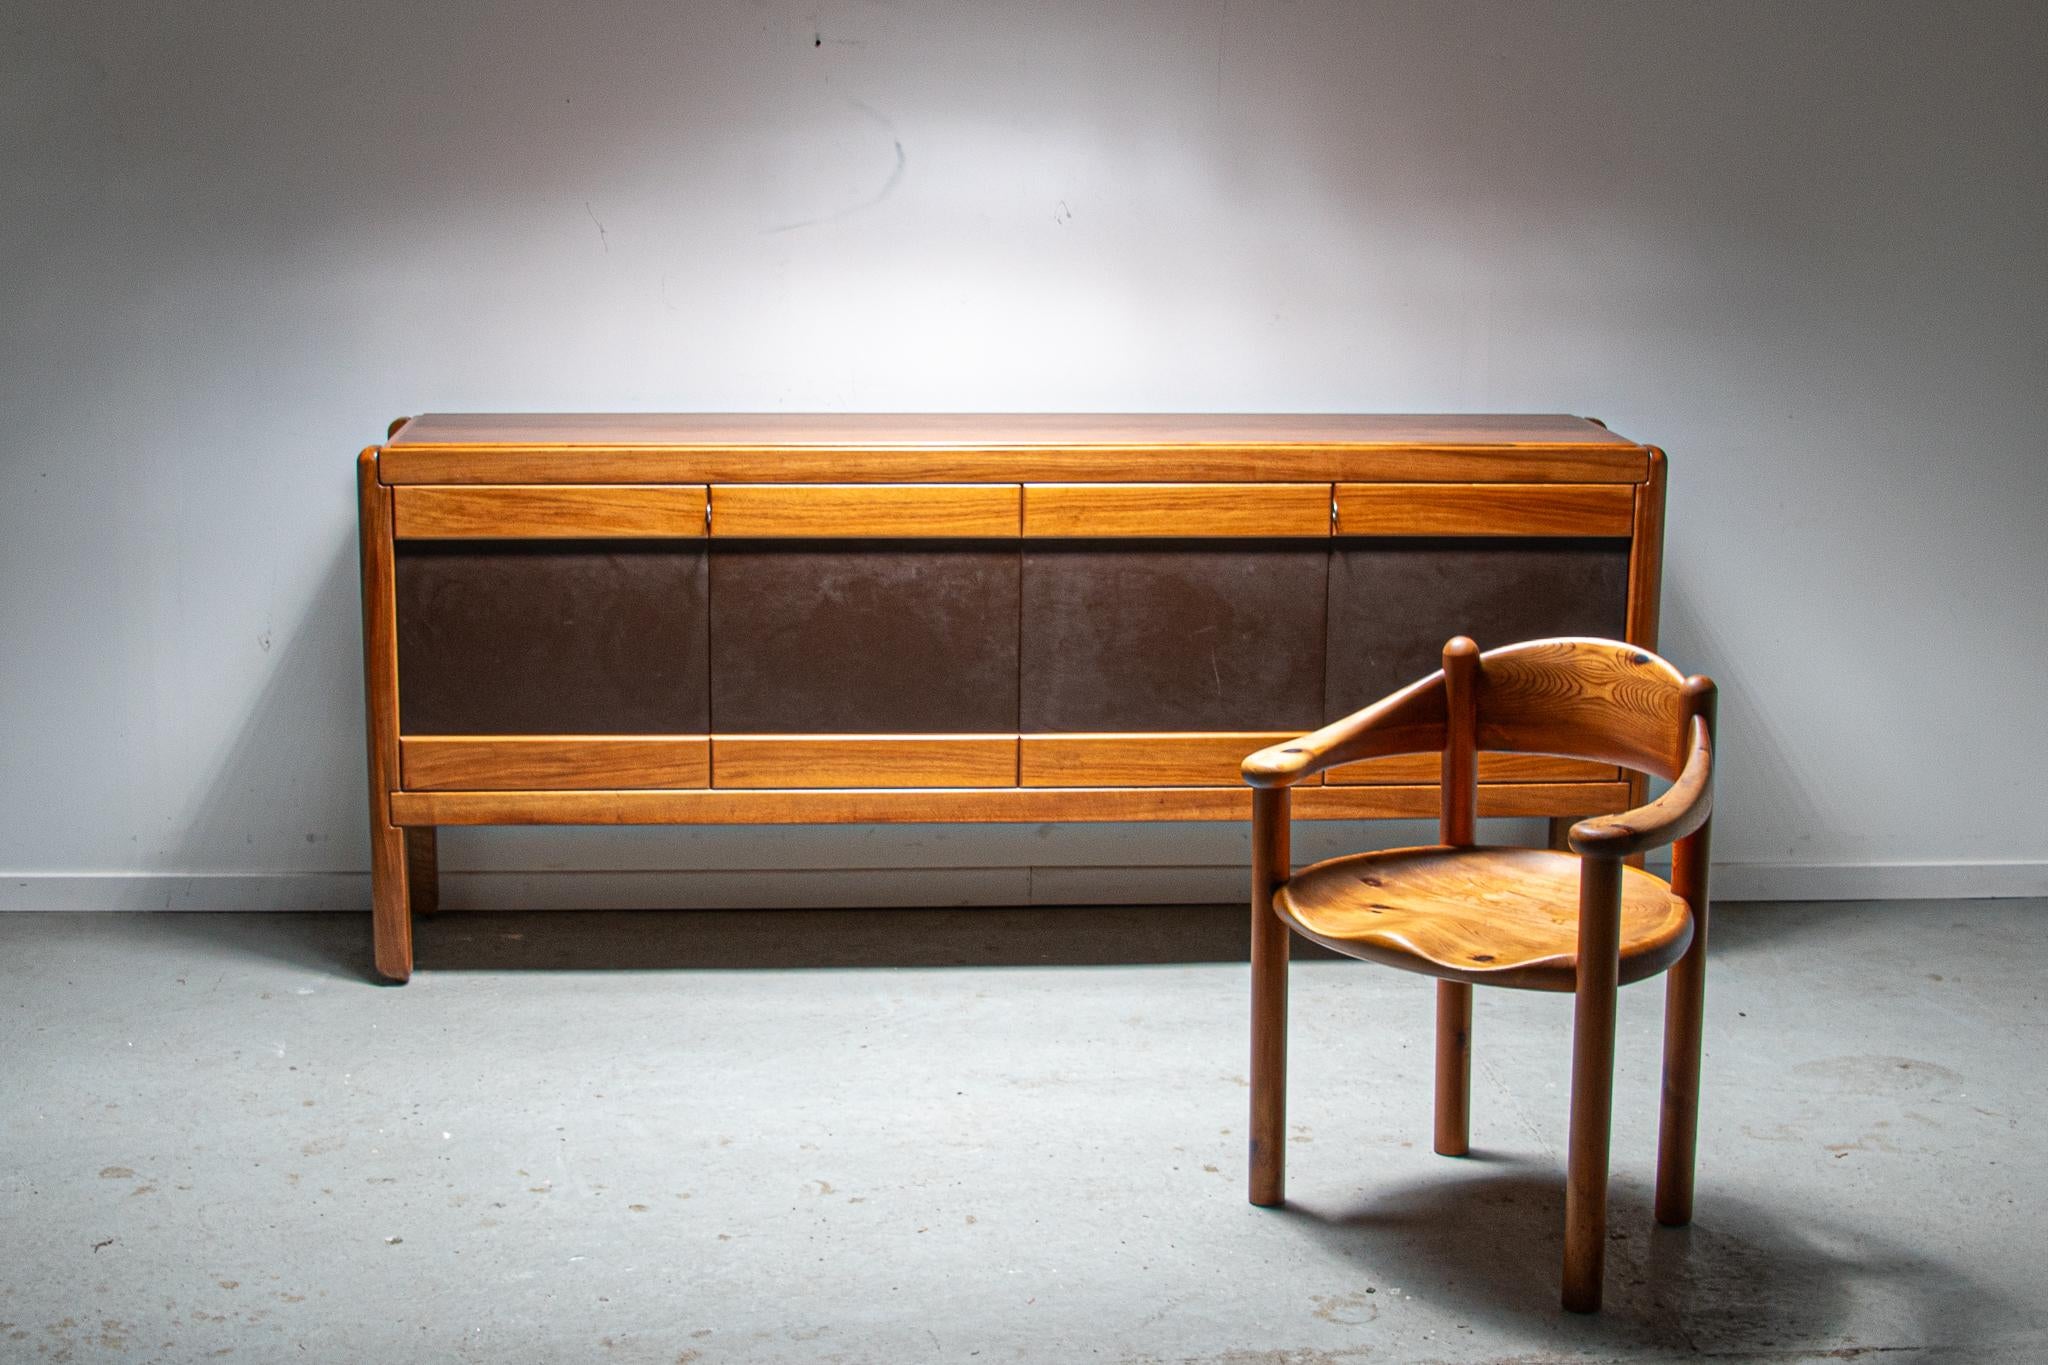 Late 20th Century Walnut Dressoir with leather inlay doors and brass details by Van Den Bergh Pauv